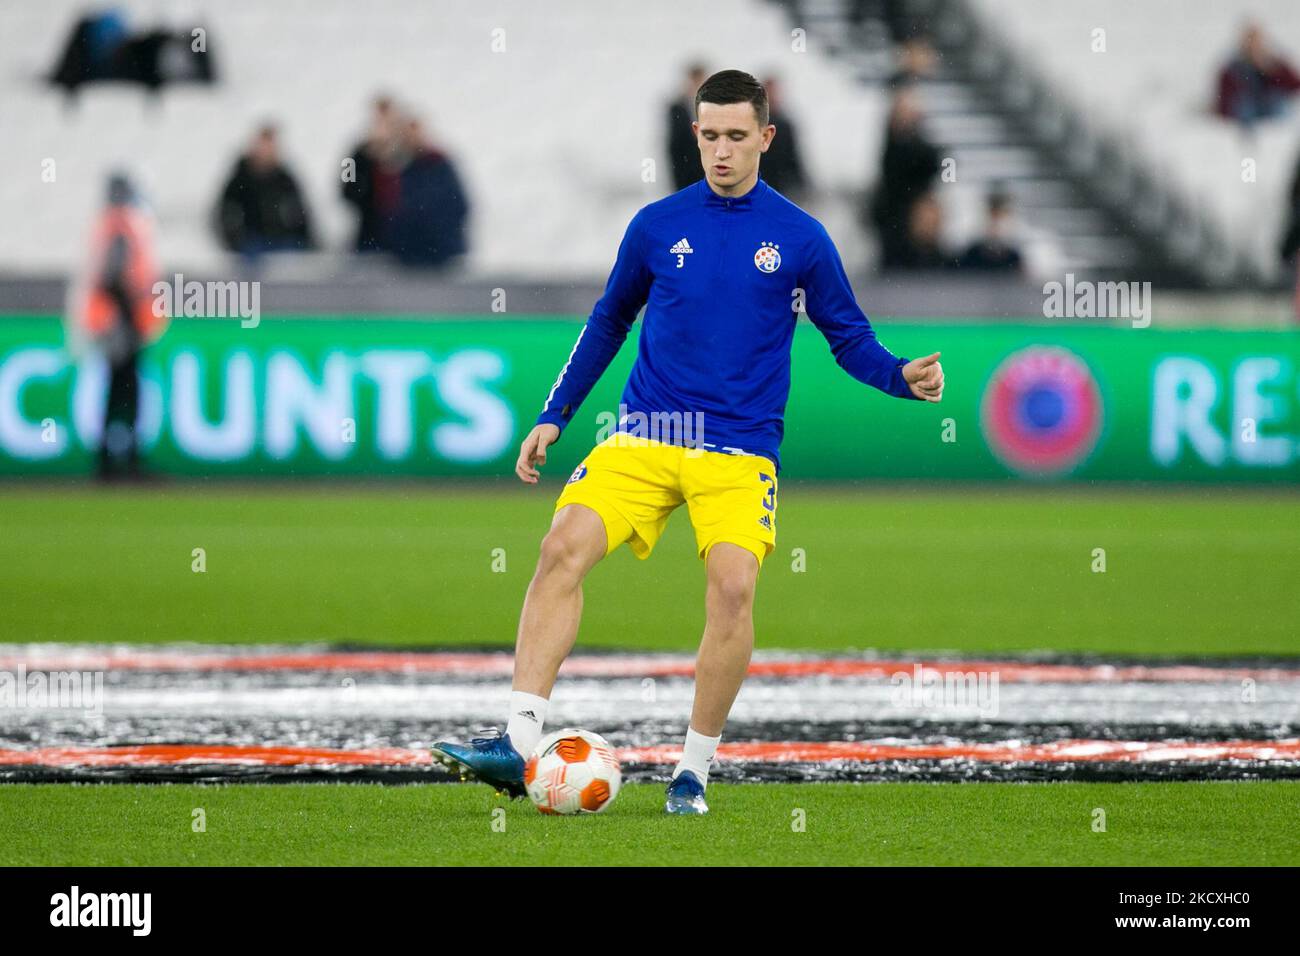 Daniel Stefulj of Dinamo Zagreb warms up during the UEFA Europa League match between West Ham United and Dinamo Zagreb at the London Stadium, Stratford on Thursday 9th December 2021. (Photo by Federico Maranesi/MI News/NurPhoto) Stock Photo